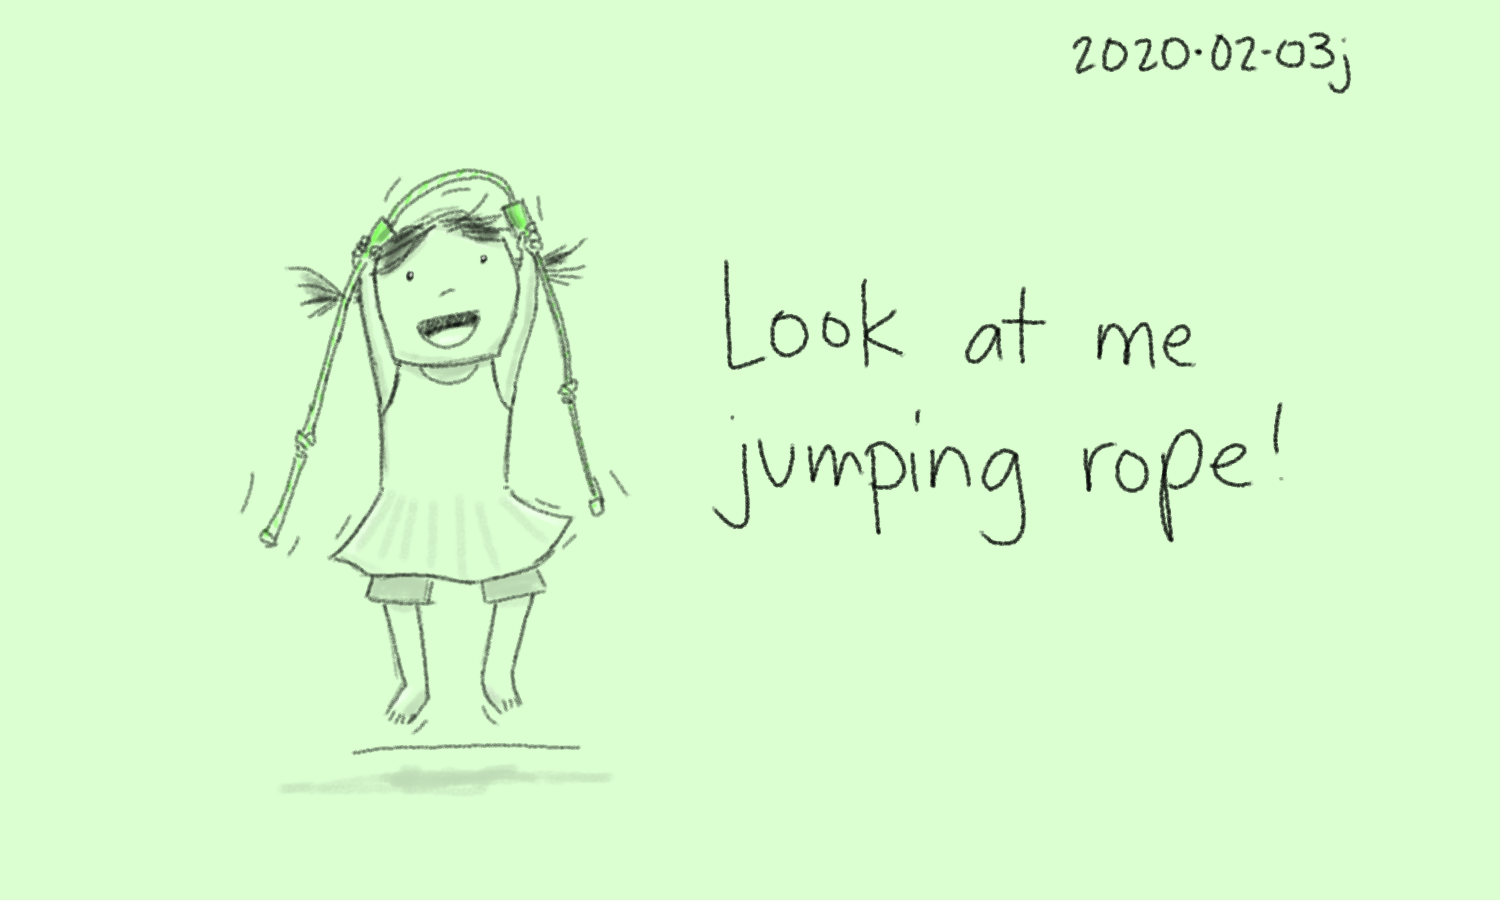 2020-02-03j Look at me jumping rope #moment #sketch.png